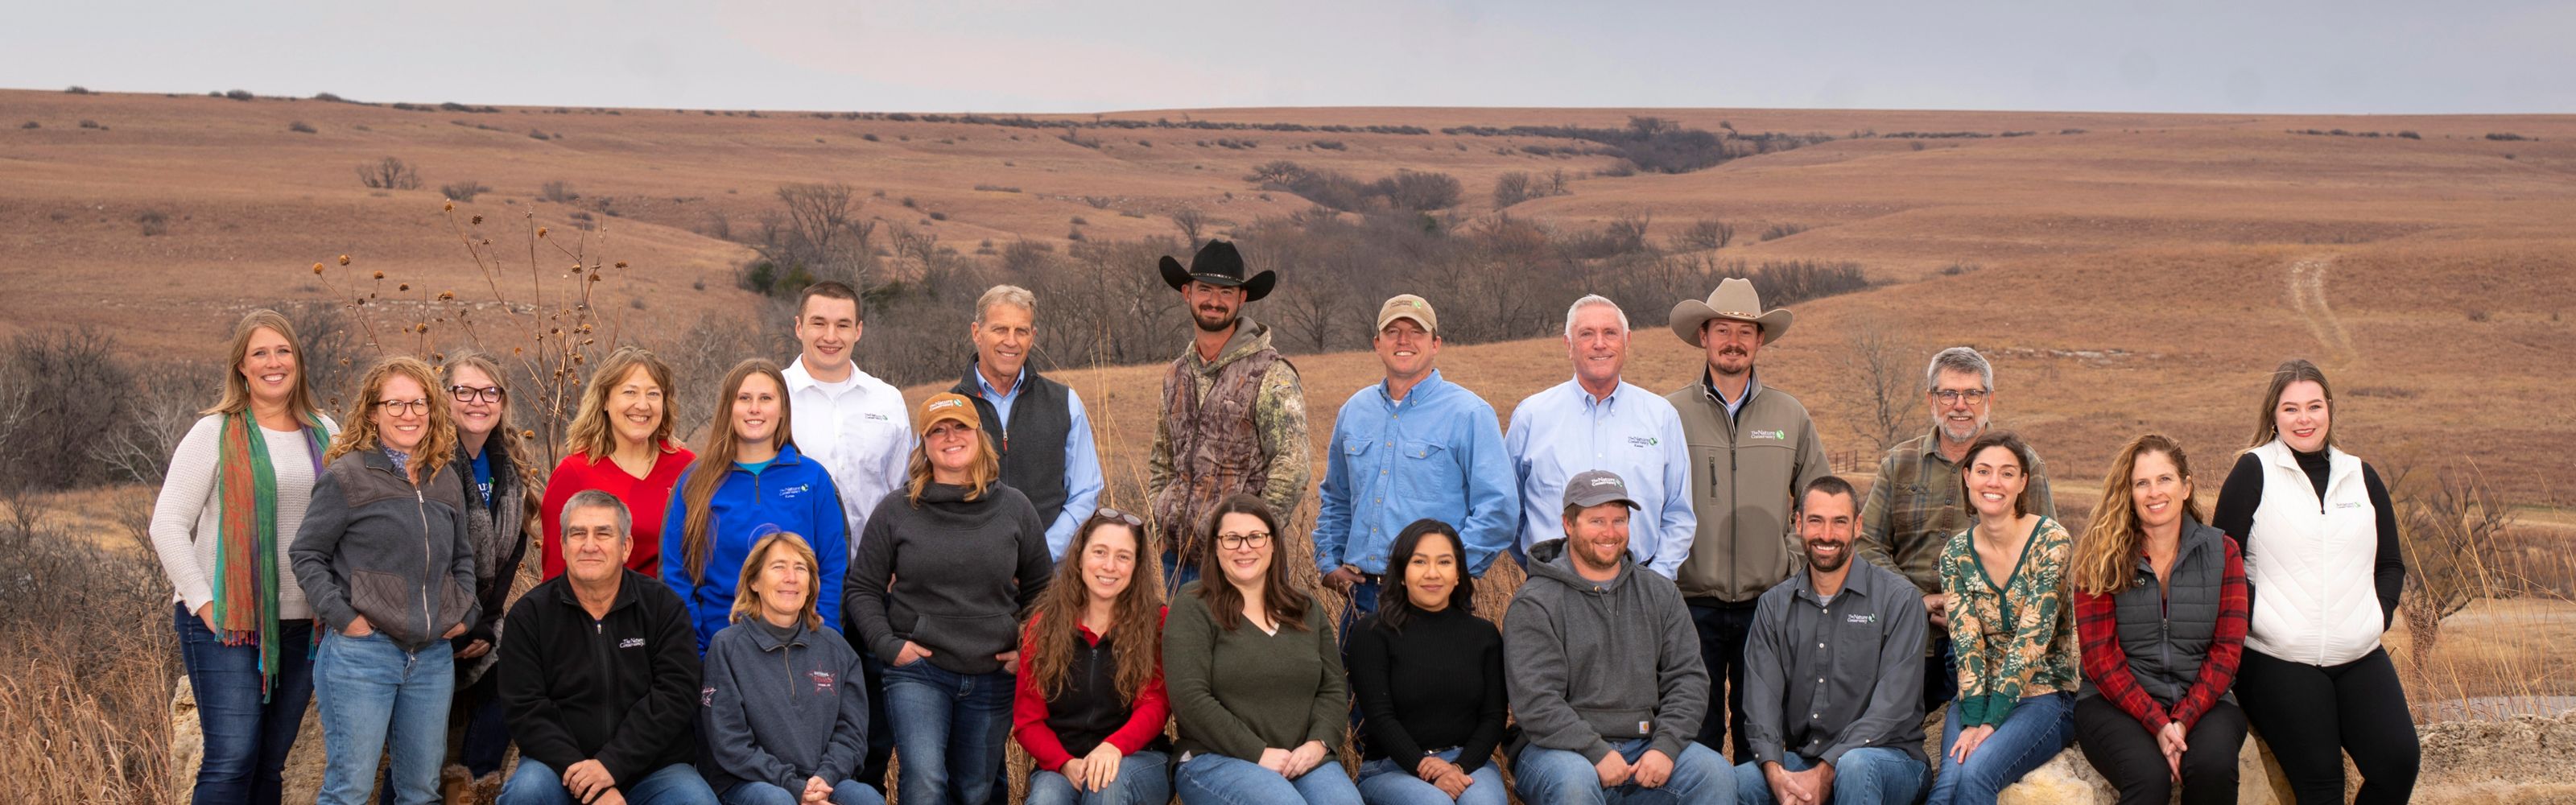 Group photo of about 25 staff members sitting and standing outside with prairie in the background.